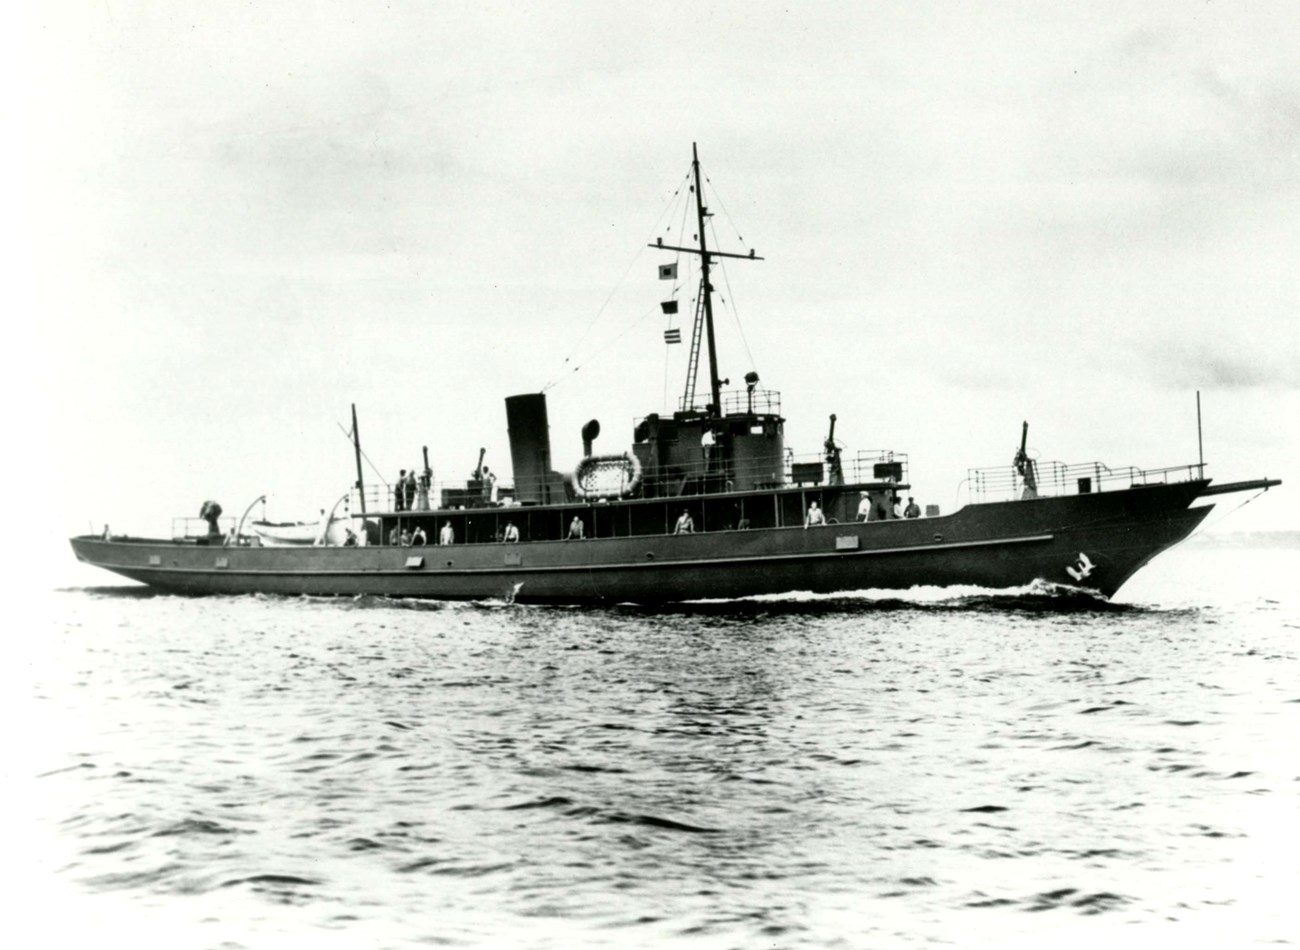 U.S.S. Sachem, a converted yacht used by Edison in 1917 for naval research